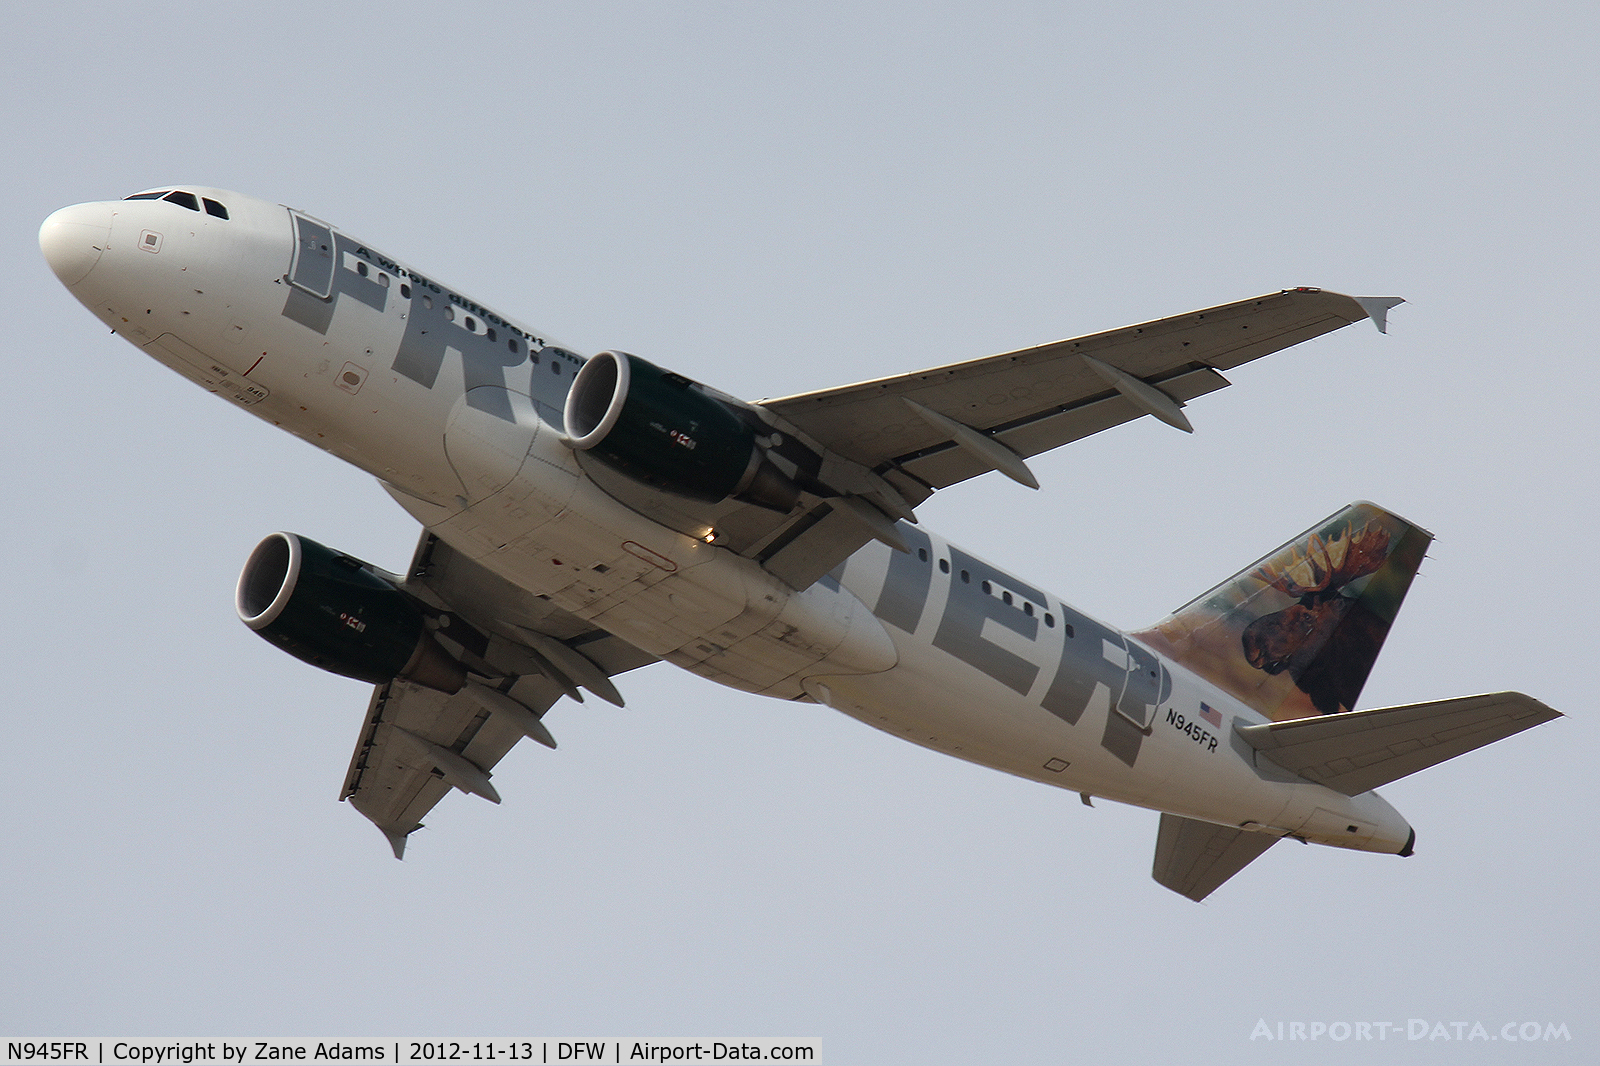 N945FR, 2006 Airbus A319-111 C/N 2751, Frontier Airlines departing DFW Airport